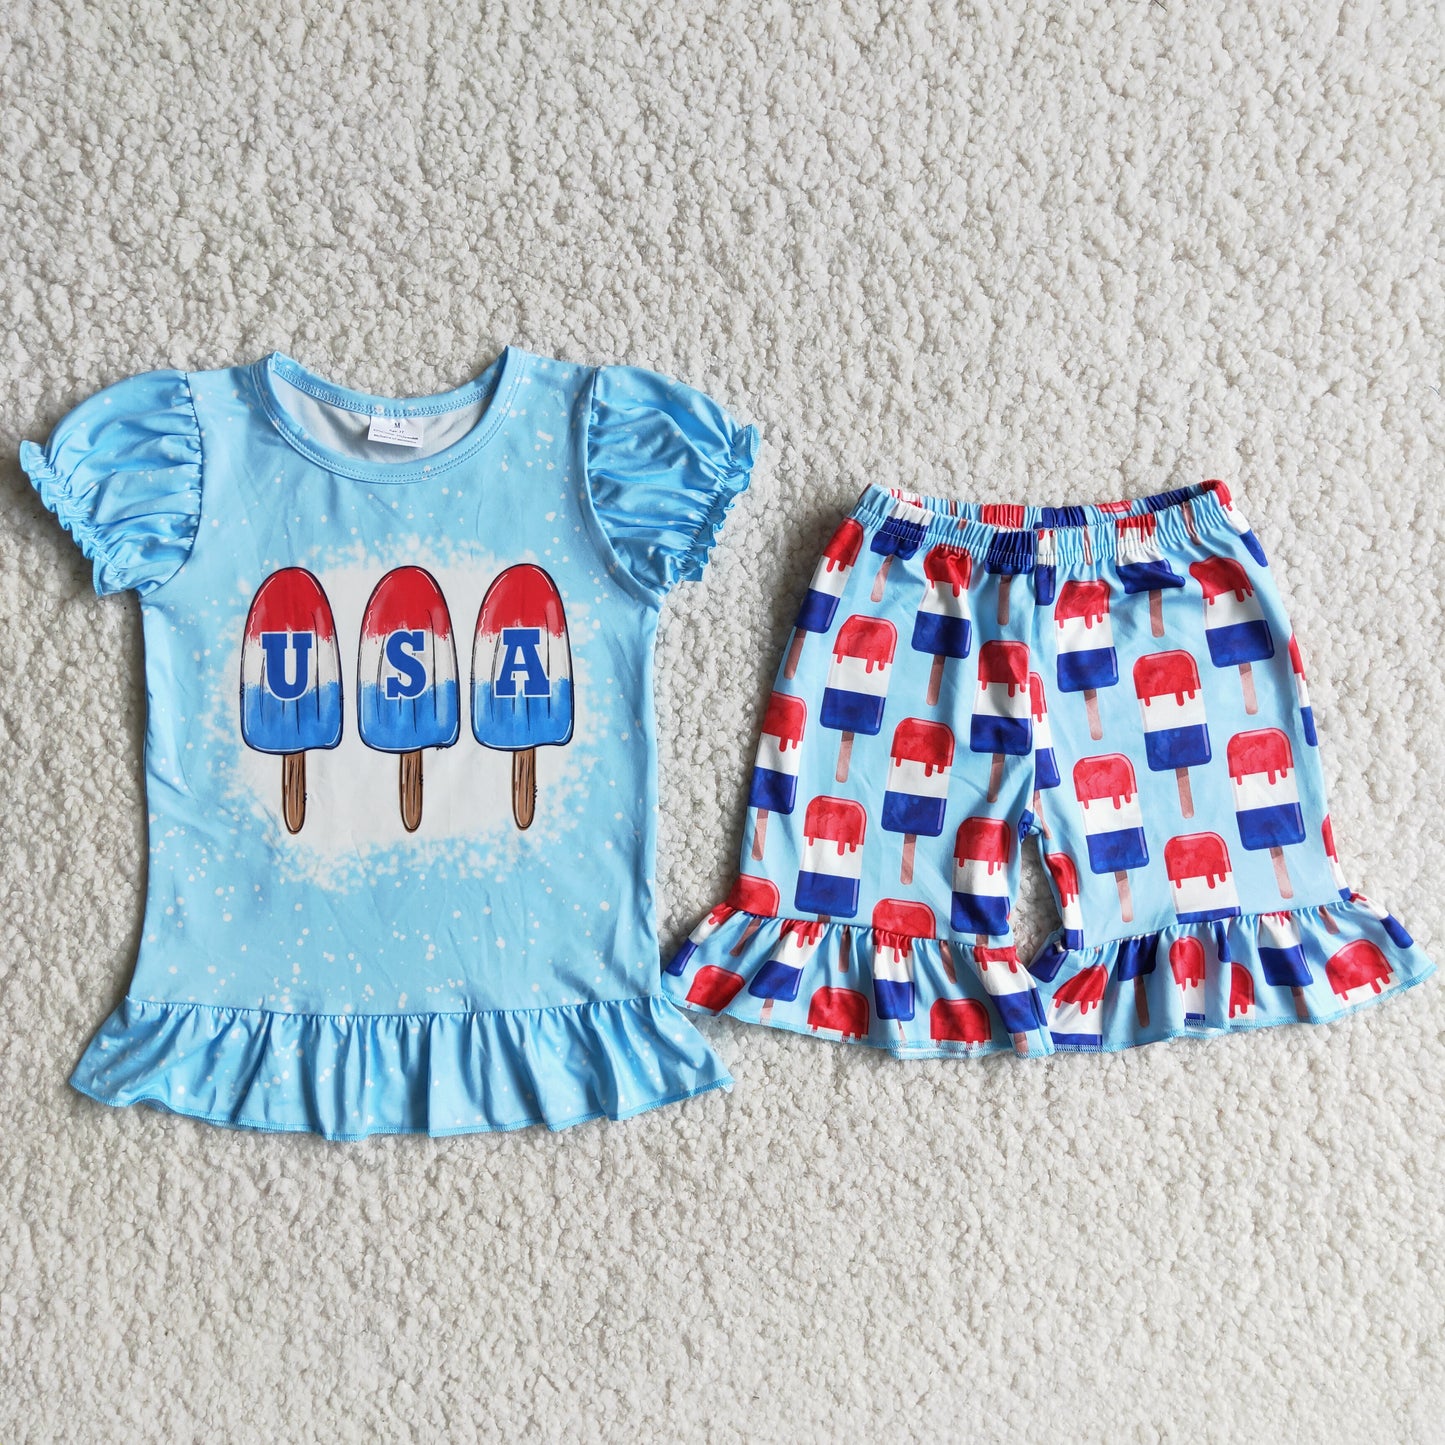 Girls July 4th summer outfit